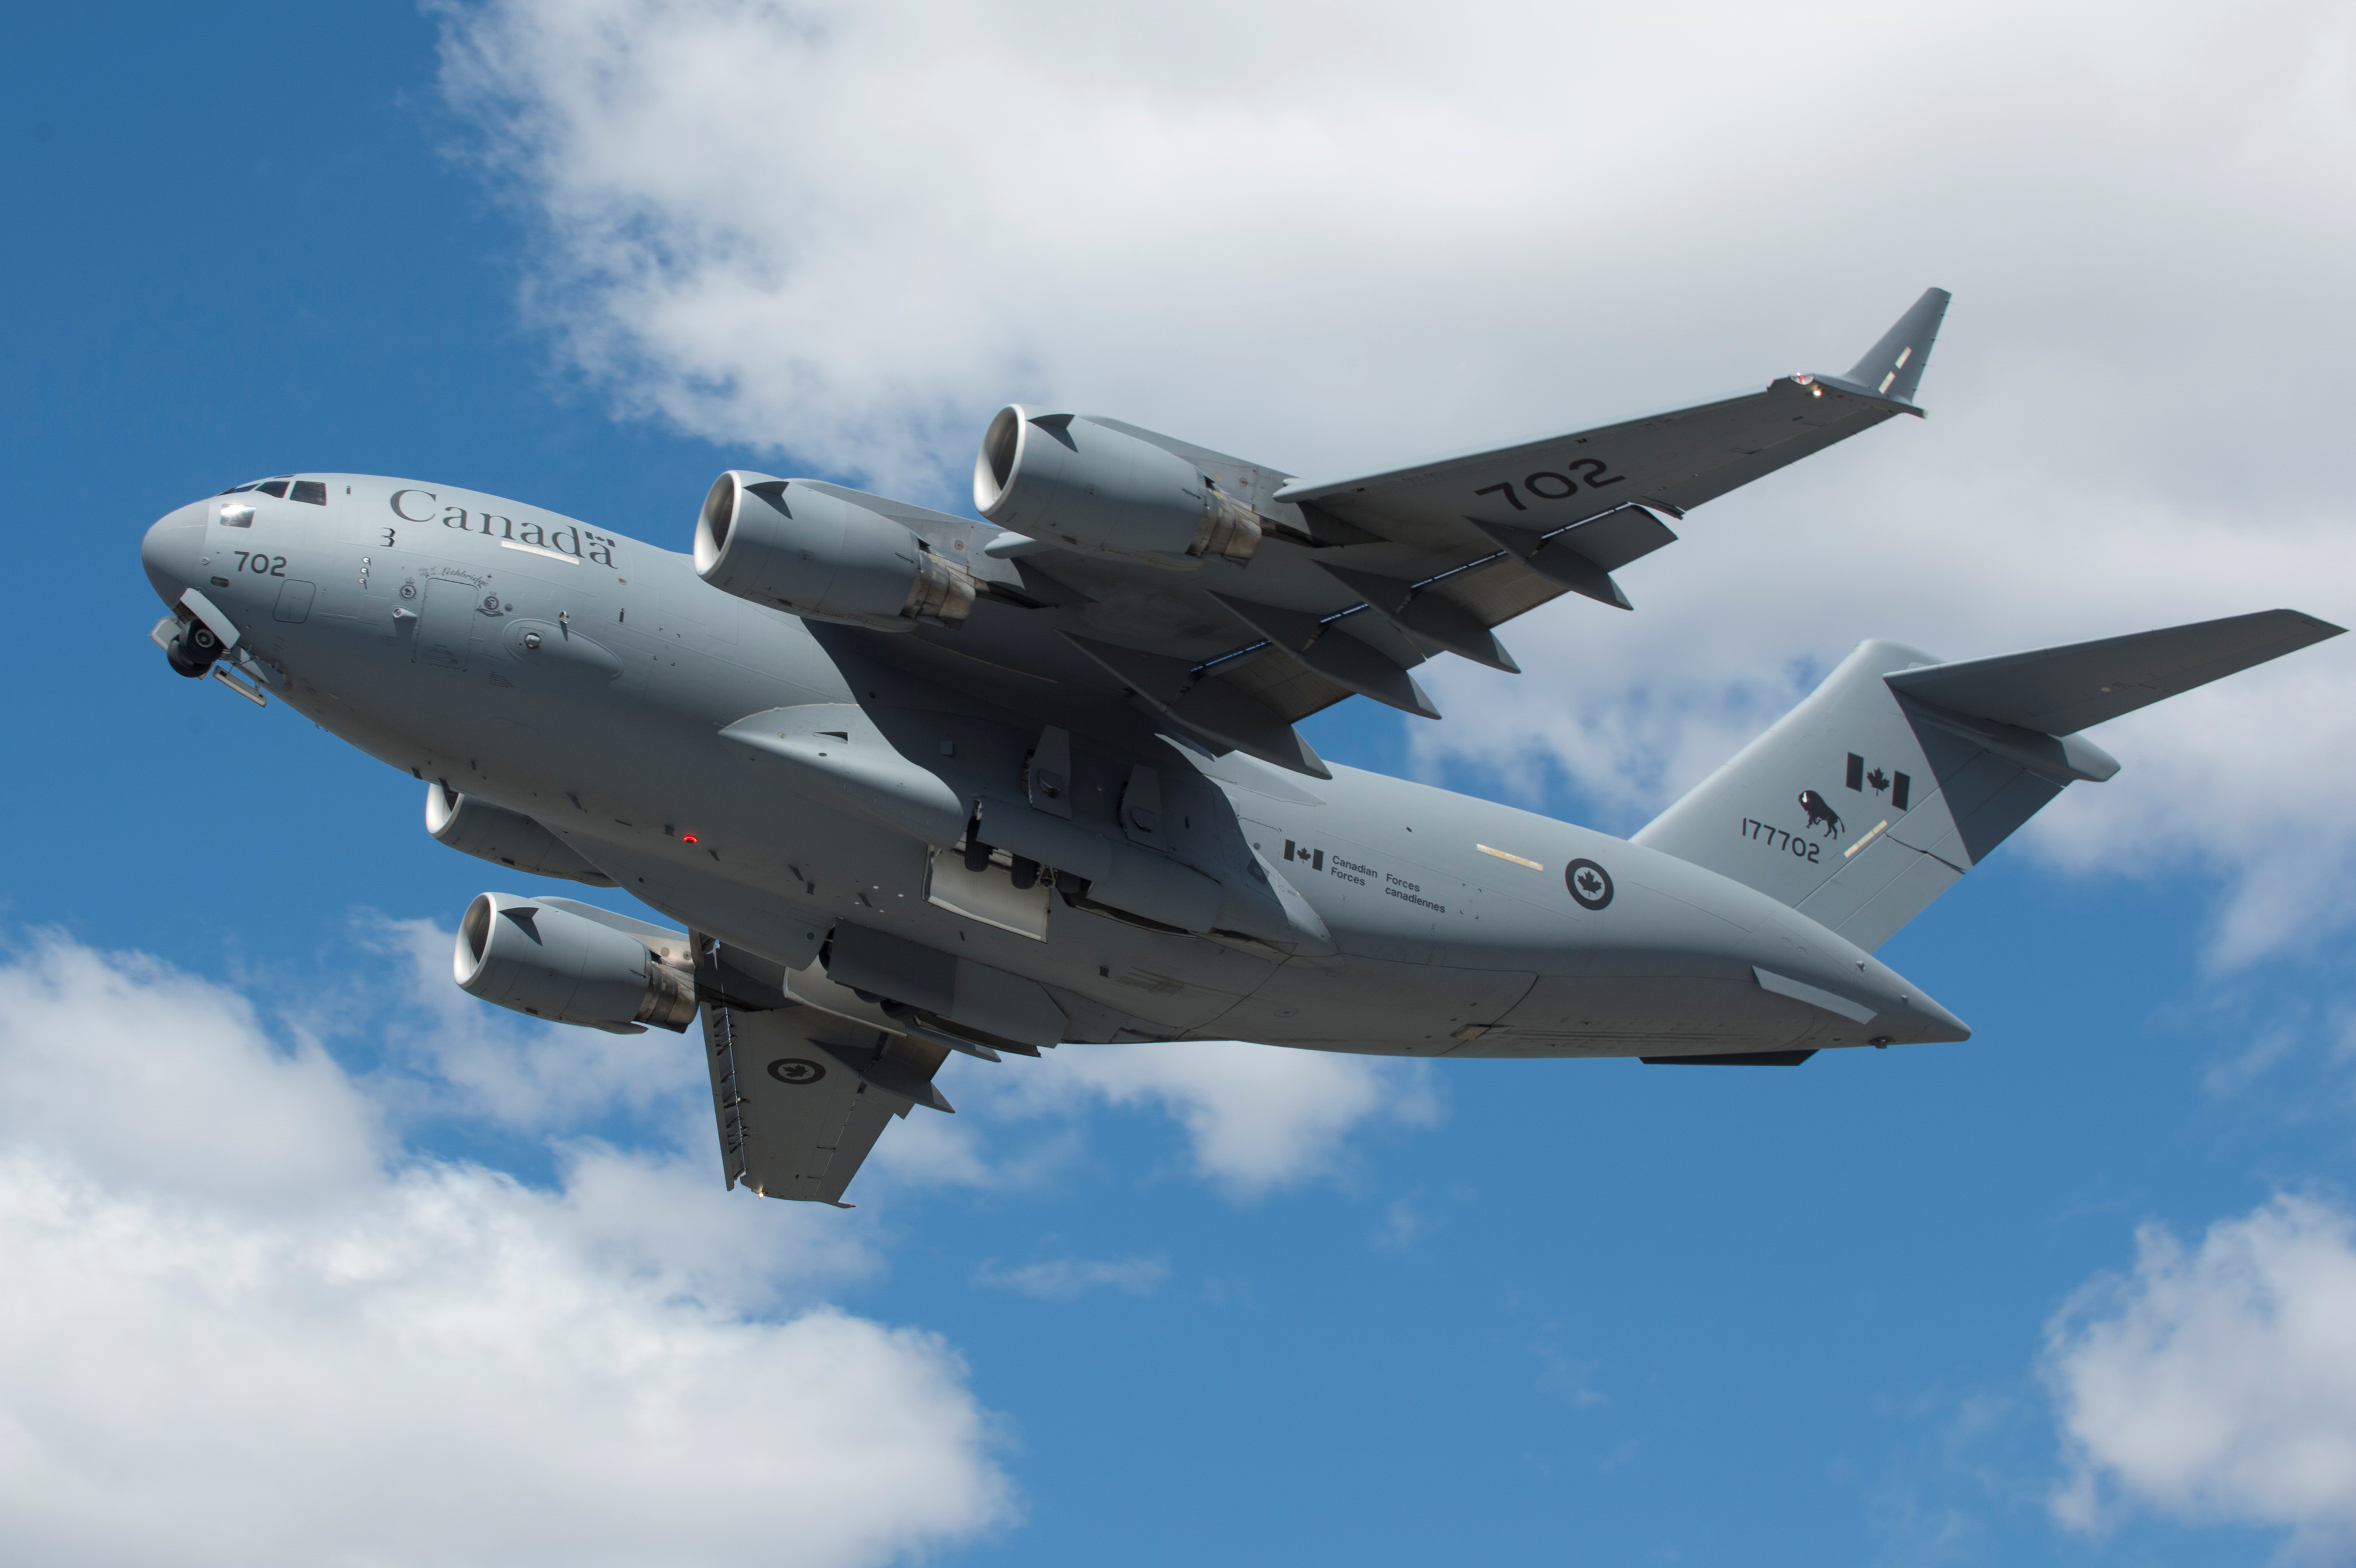 A large grey aircraft with military markings flies against a blue sky. 